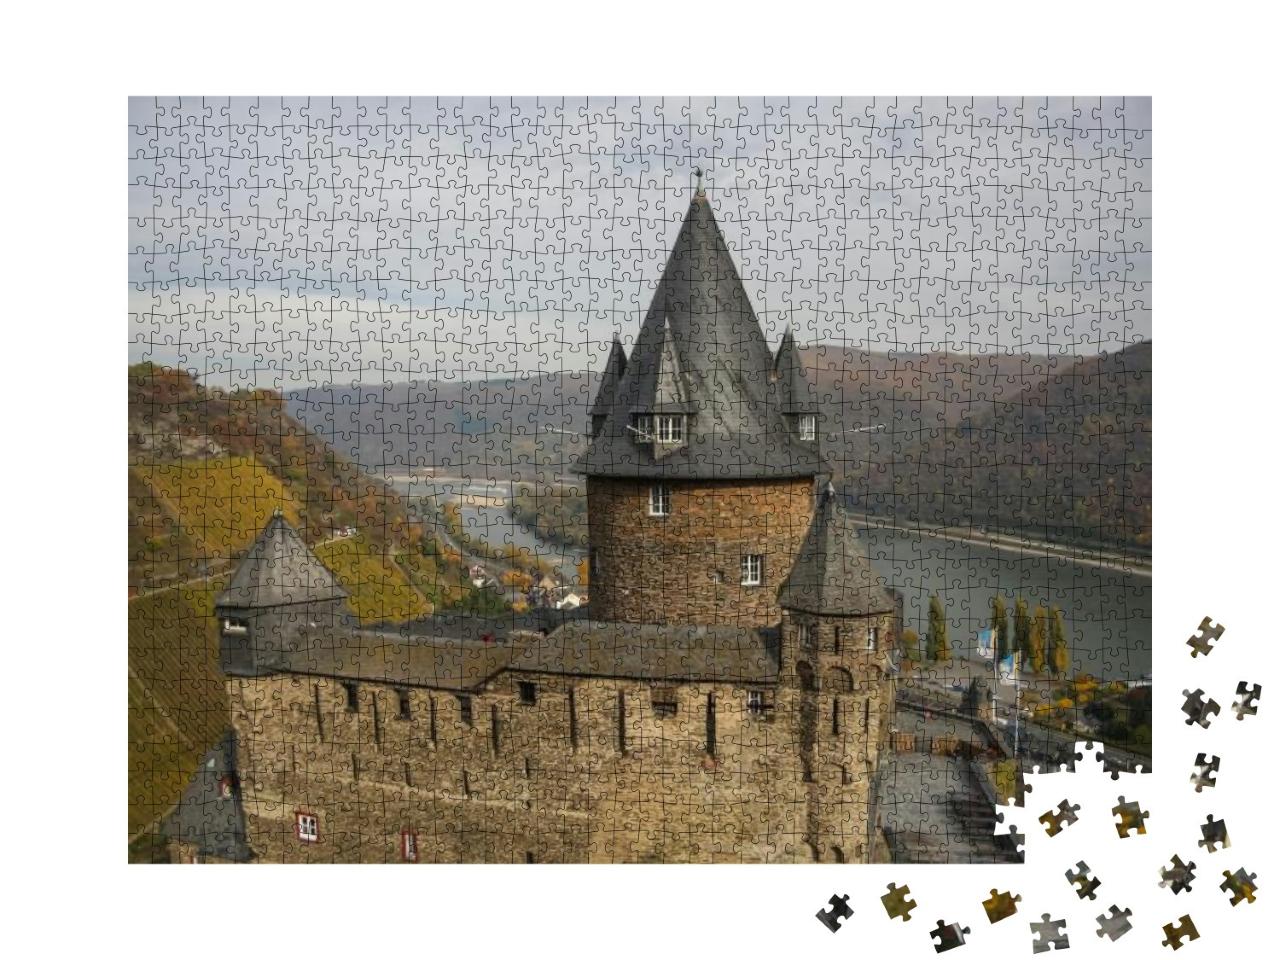 Stahleck Castle in Bacharach, Rhine Valley, Germany... Jigsaw Puzzle with 1000 pieces